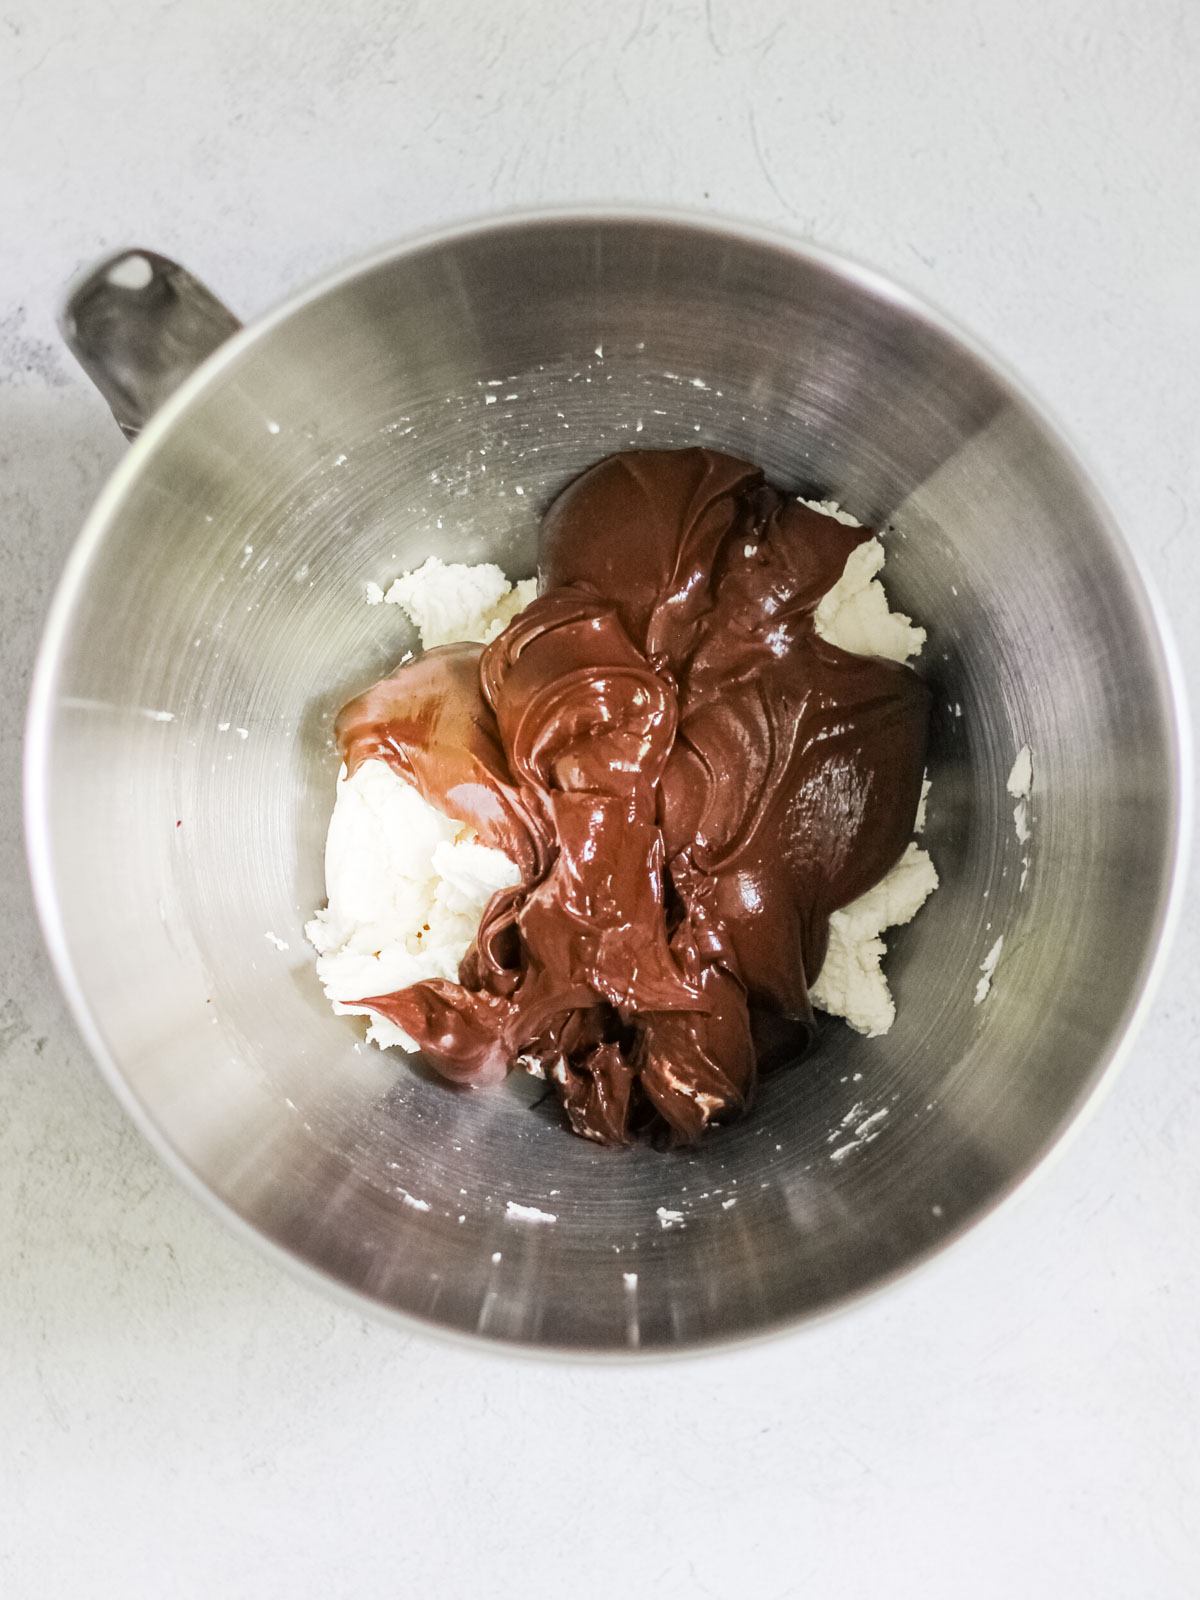 Mixing bowl with ingredients for chocolate ganache.